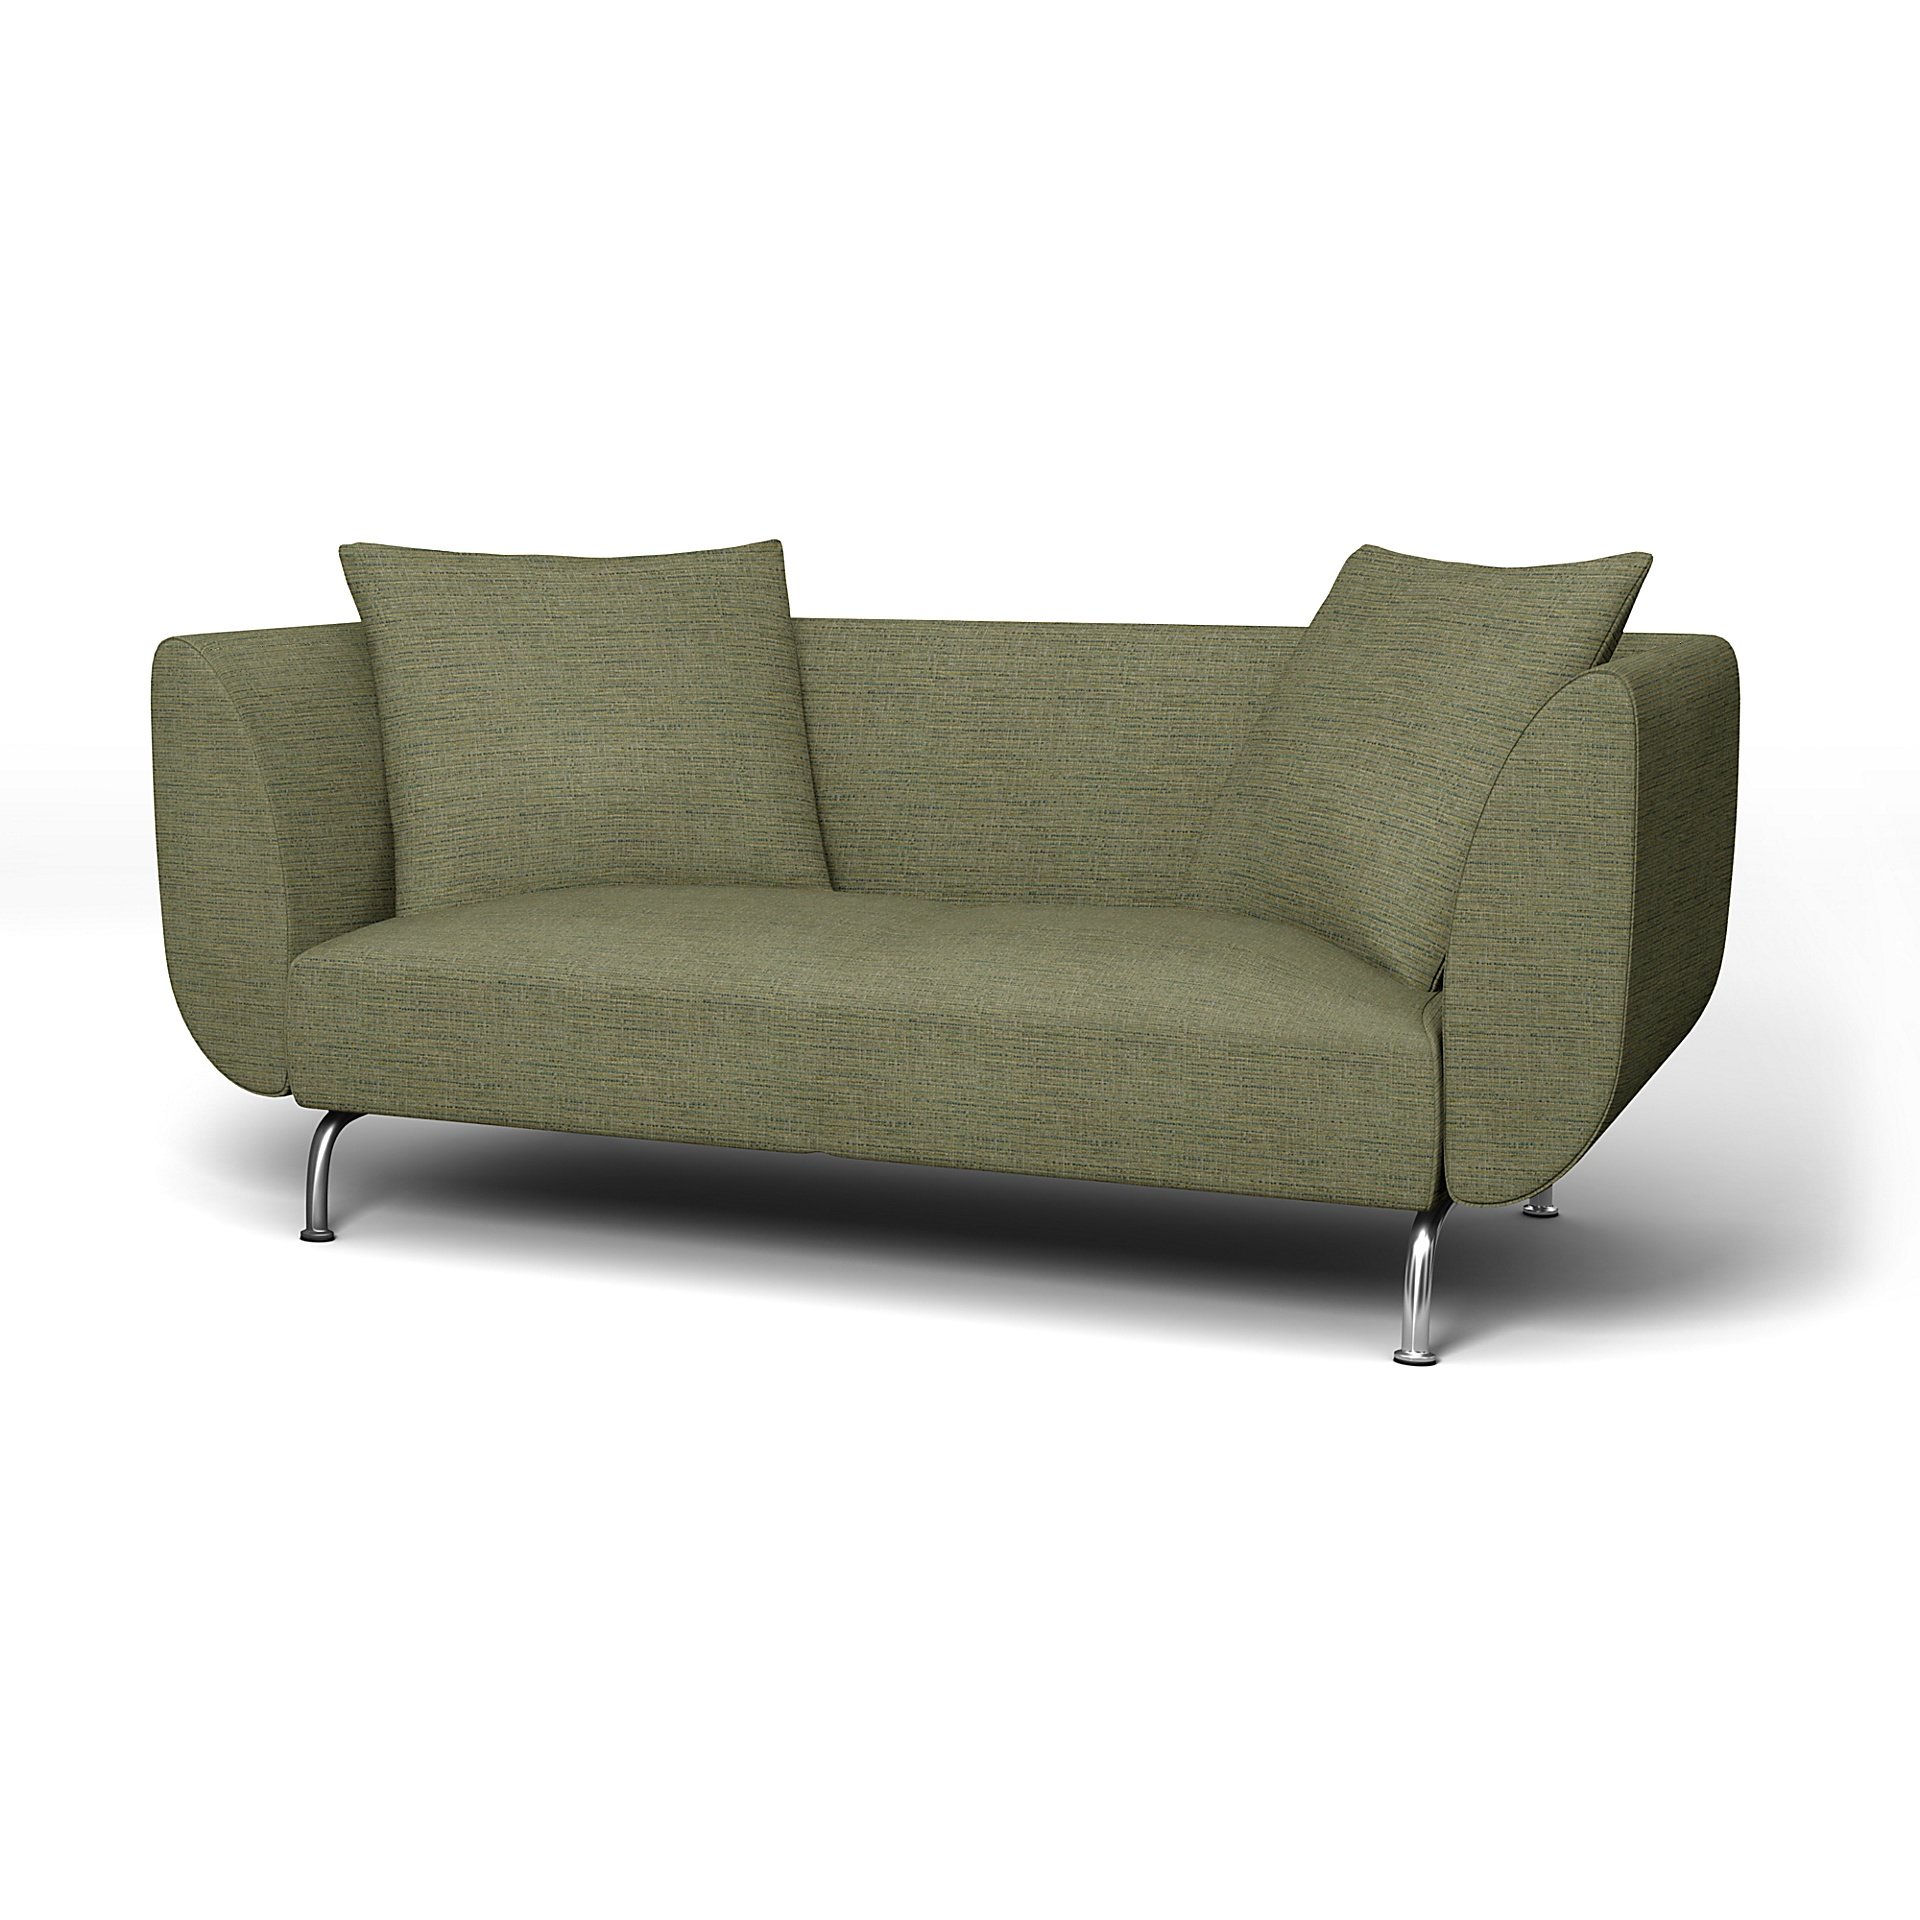 IKEA - Stromstad 2 Seater Sofa Cover, Meadow Green, Boucle & Texture - Bemz